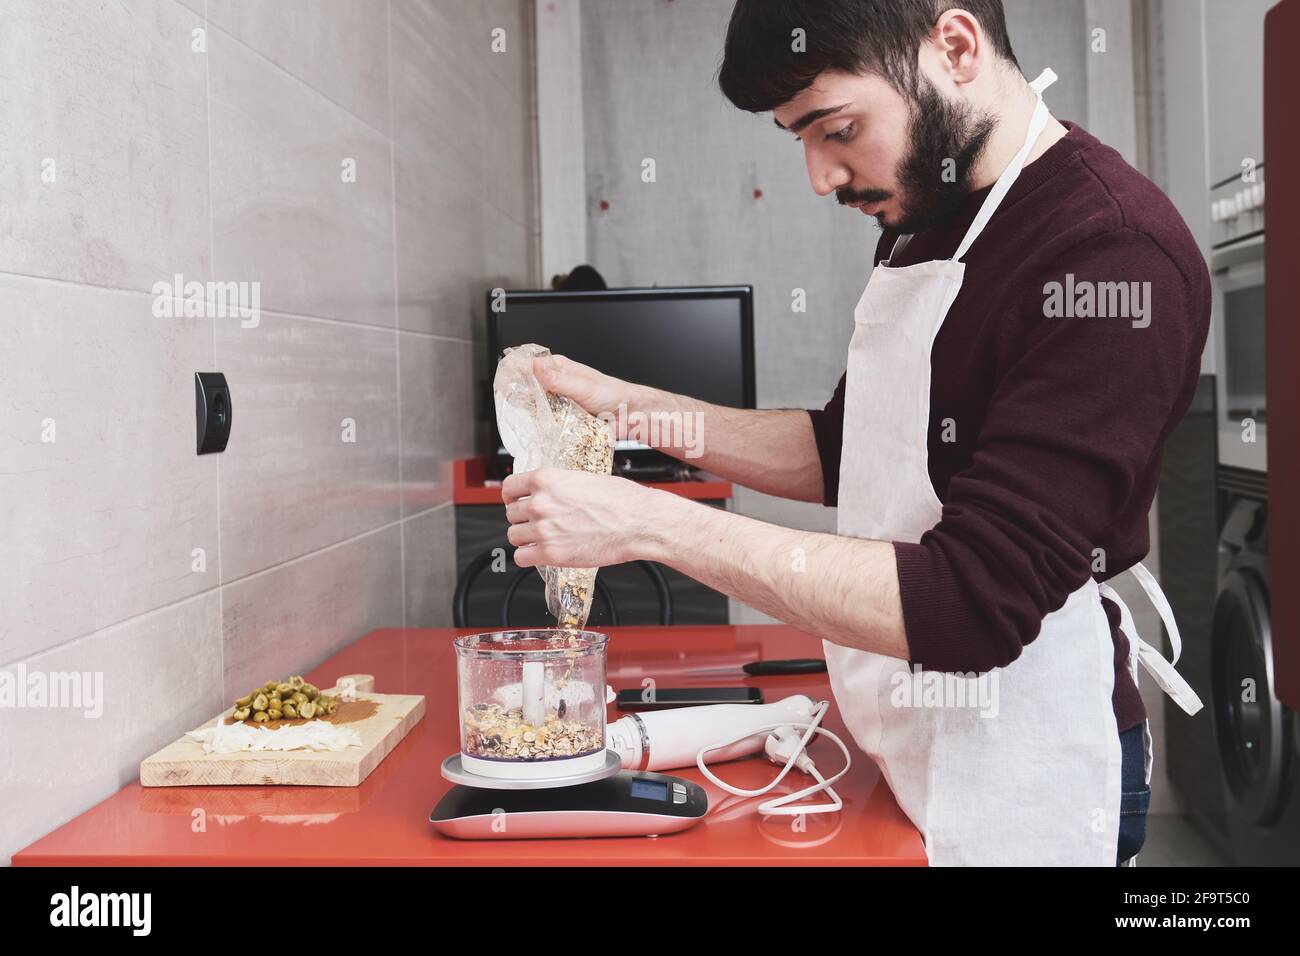 Young caucasian man in apron cooking in a kitchen. He is weighting muesli on a scale. Stock Photo